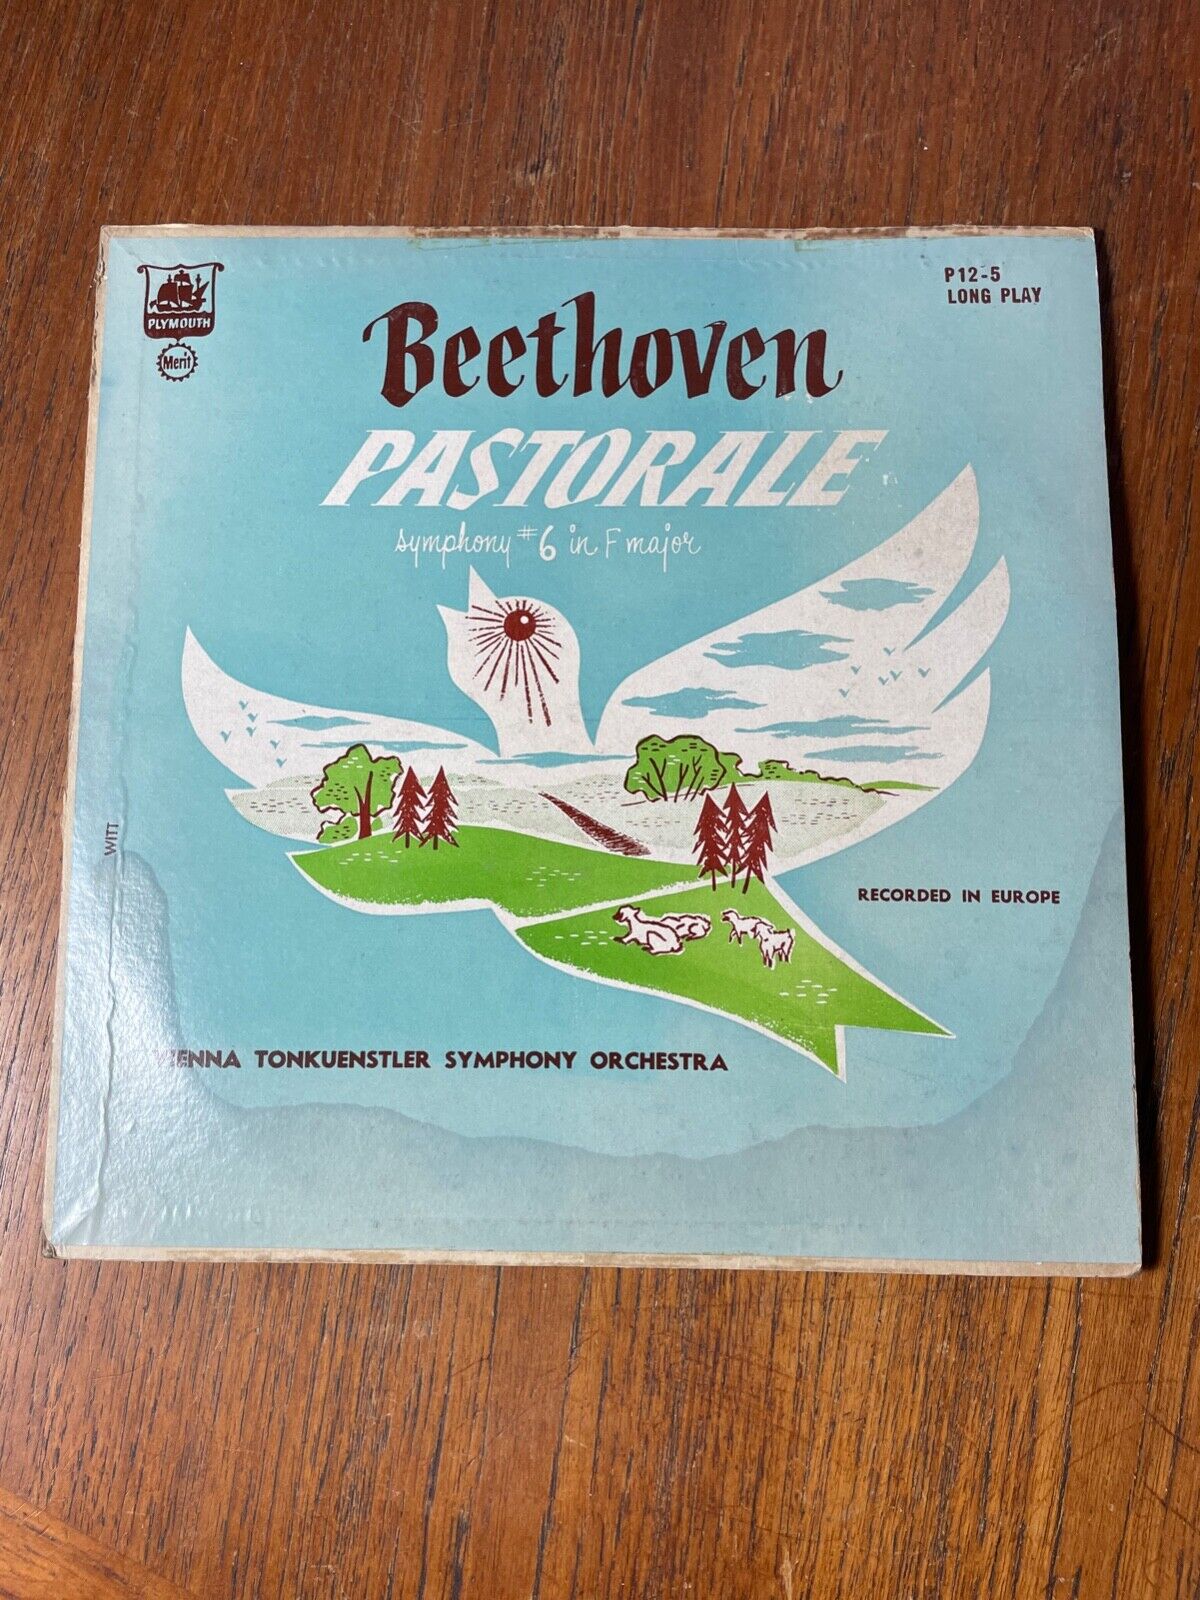 BEETHOVEN Pastorale Symphony No 6 in f major LP Plymouth Records VINTAGE